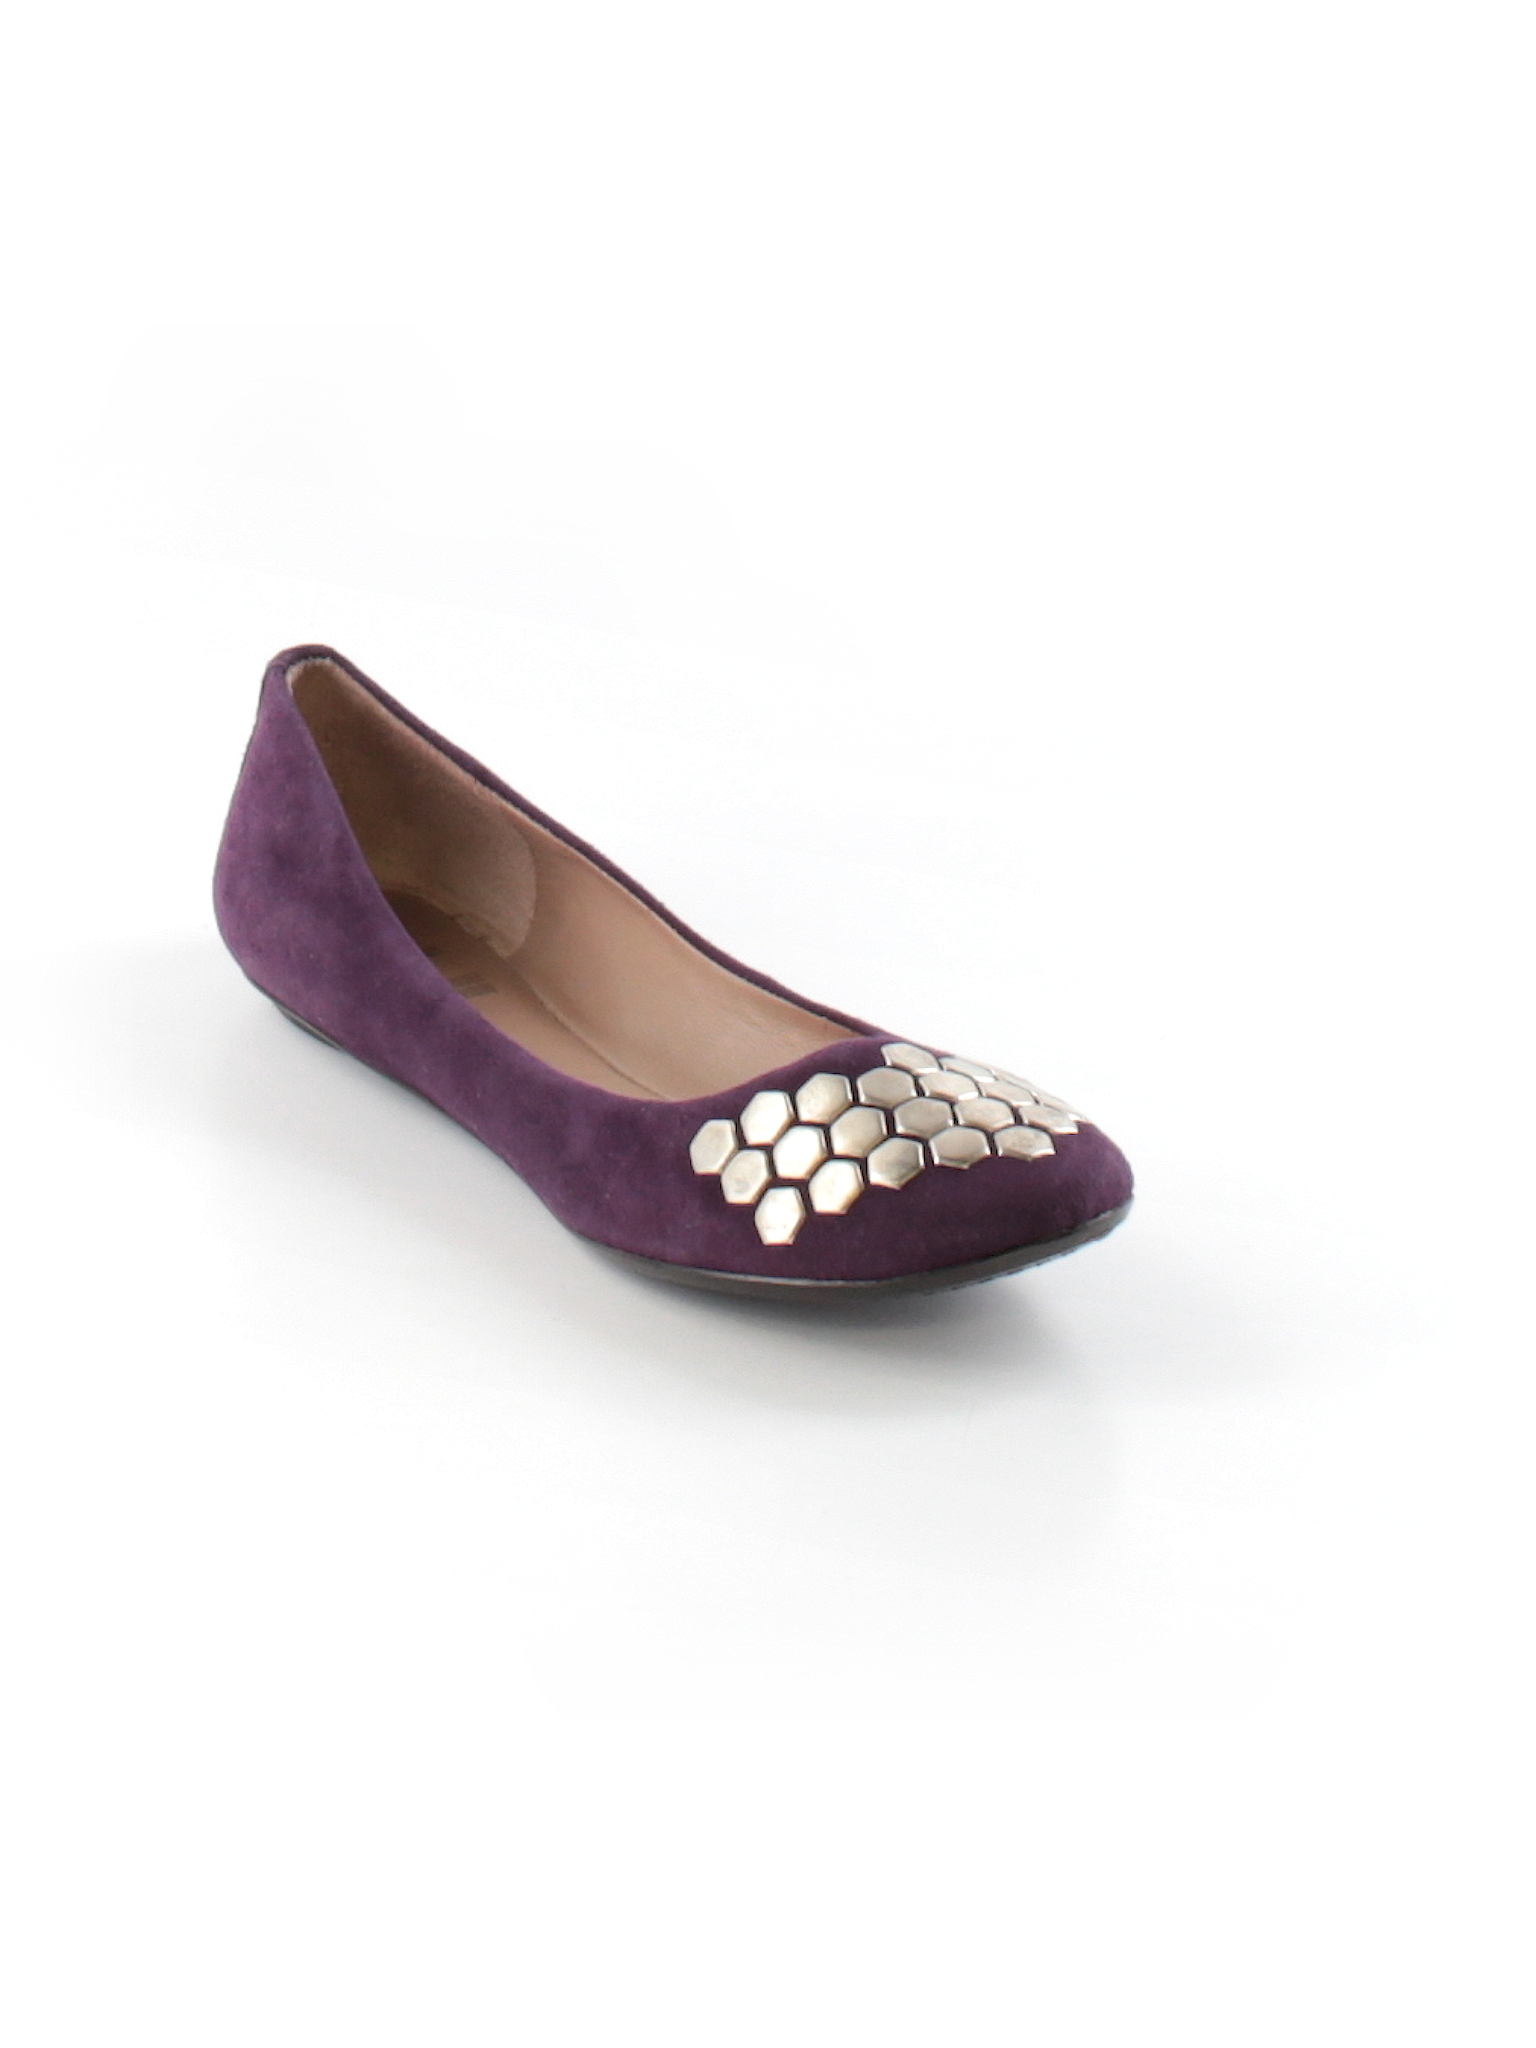 Belle by Sigerson Morrison Solid Dark Purple Flats Size 6 - 96% off ...